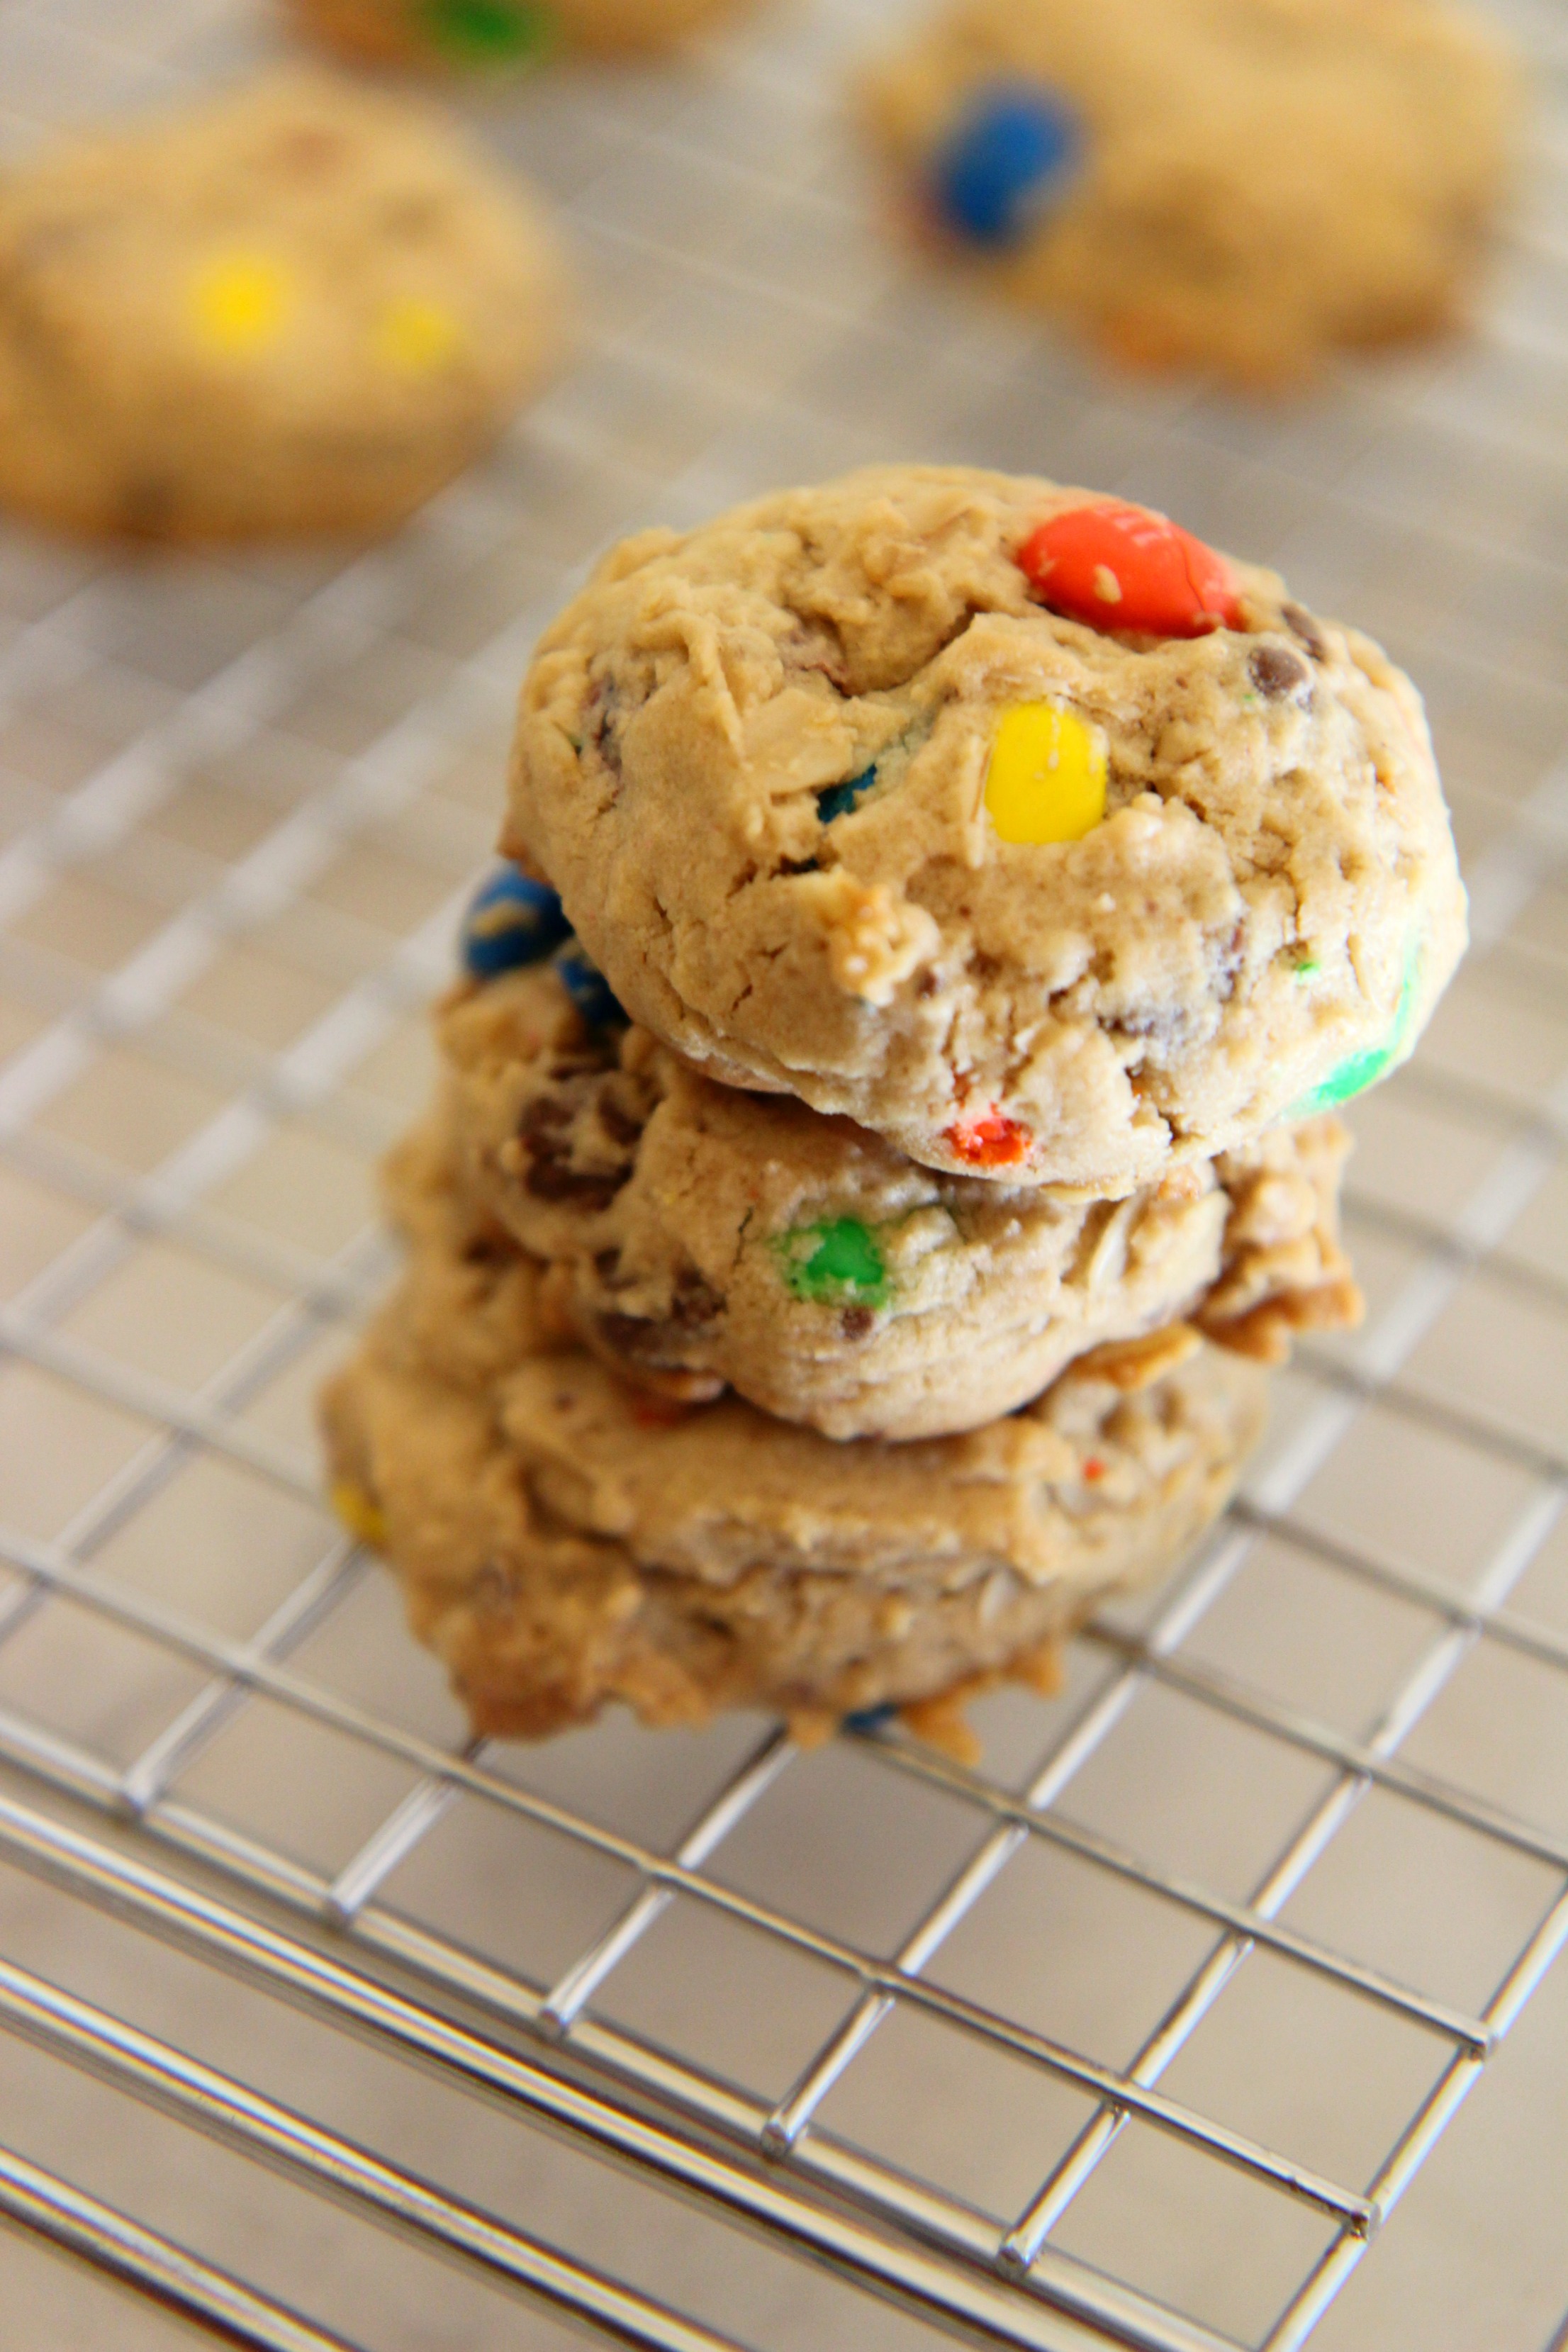 These monster cookies are packed with chocolate candies, oats, and mini chocolate chips for a sweet soft baked cookie